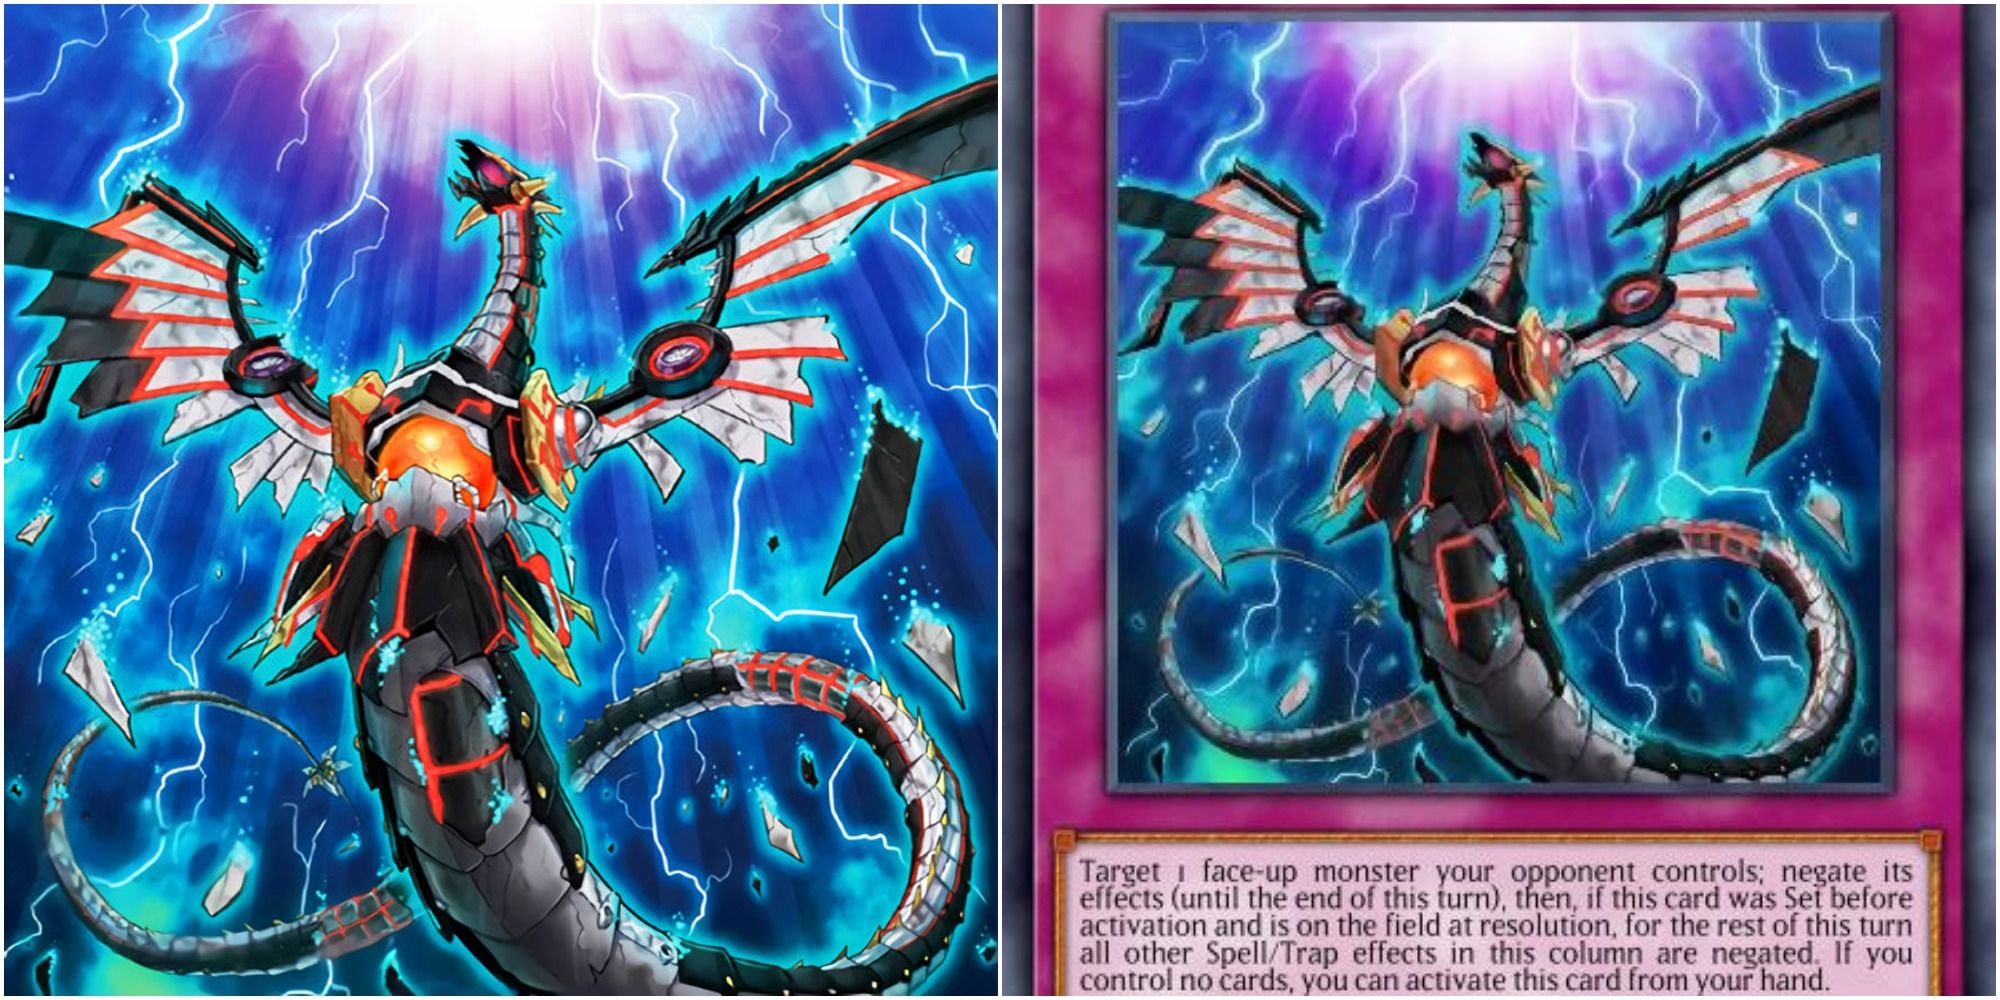 yugioh infinite impermanence art and card text.